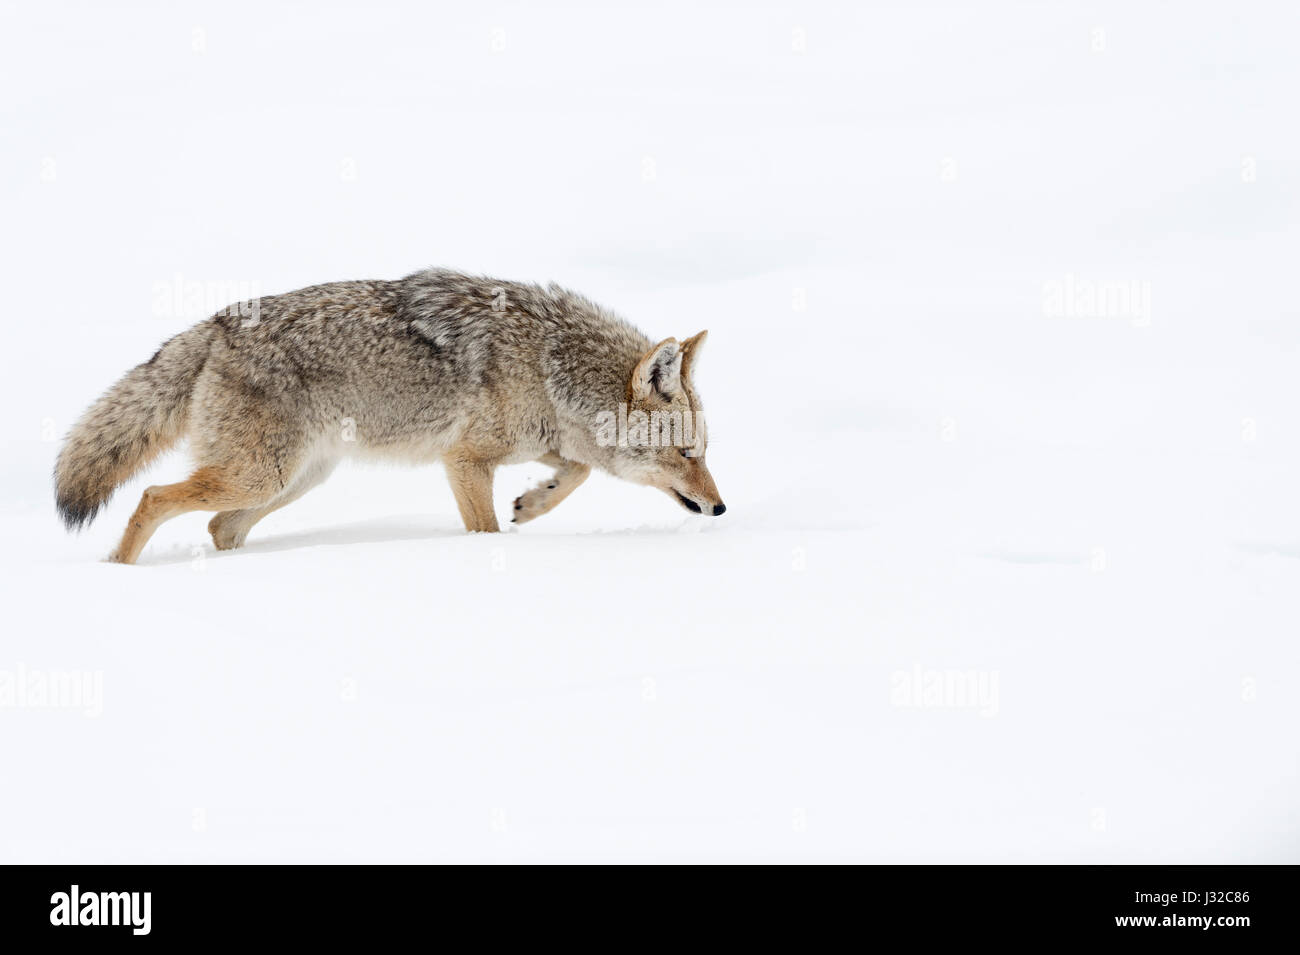 Coyote / Kojote ( Canis latrans ), in winter, walking through deep snow, with its nose on the ground, hunting, scenting for prey, Yellowstone NP, USA. Stock Photo